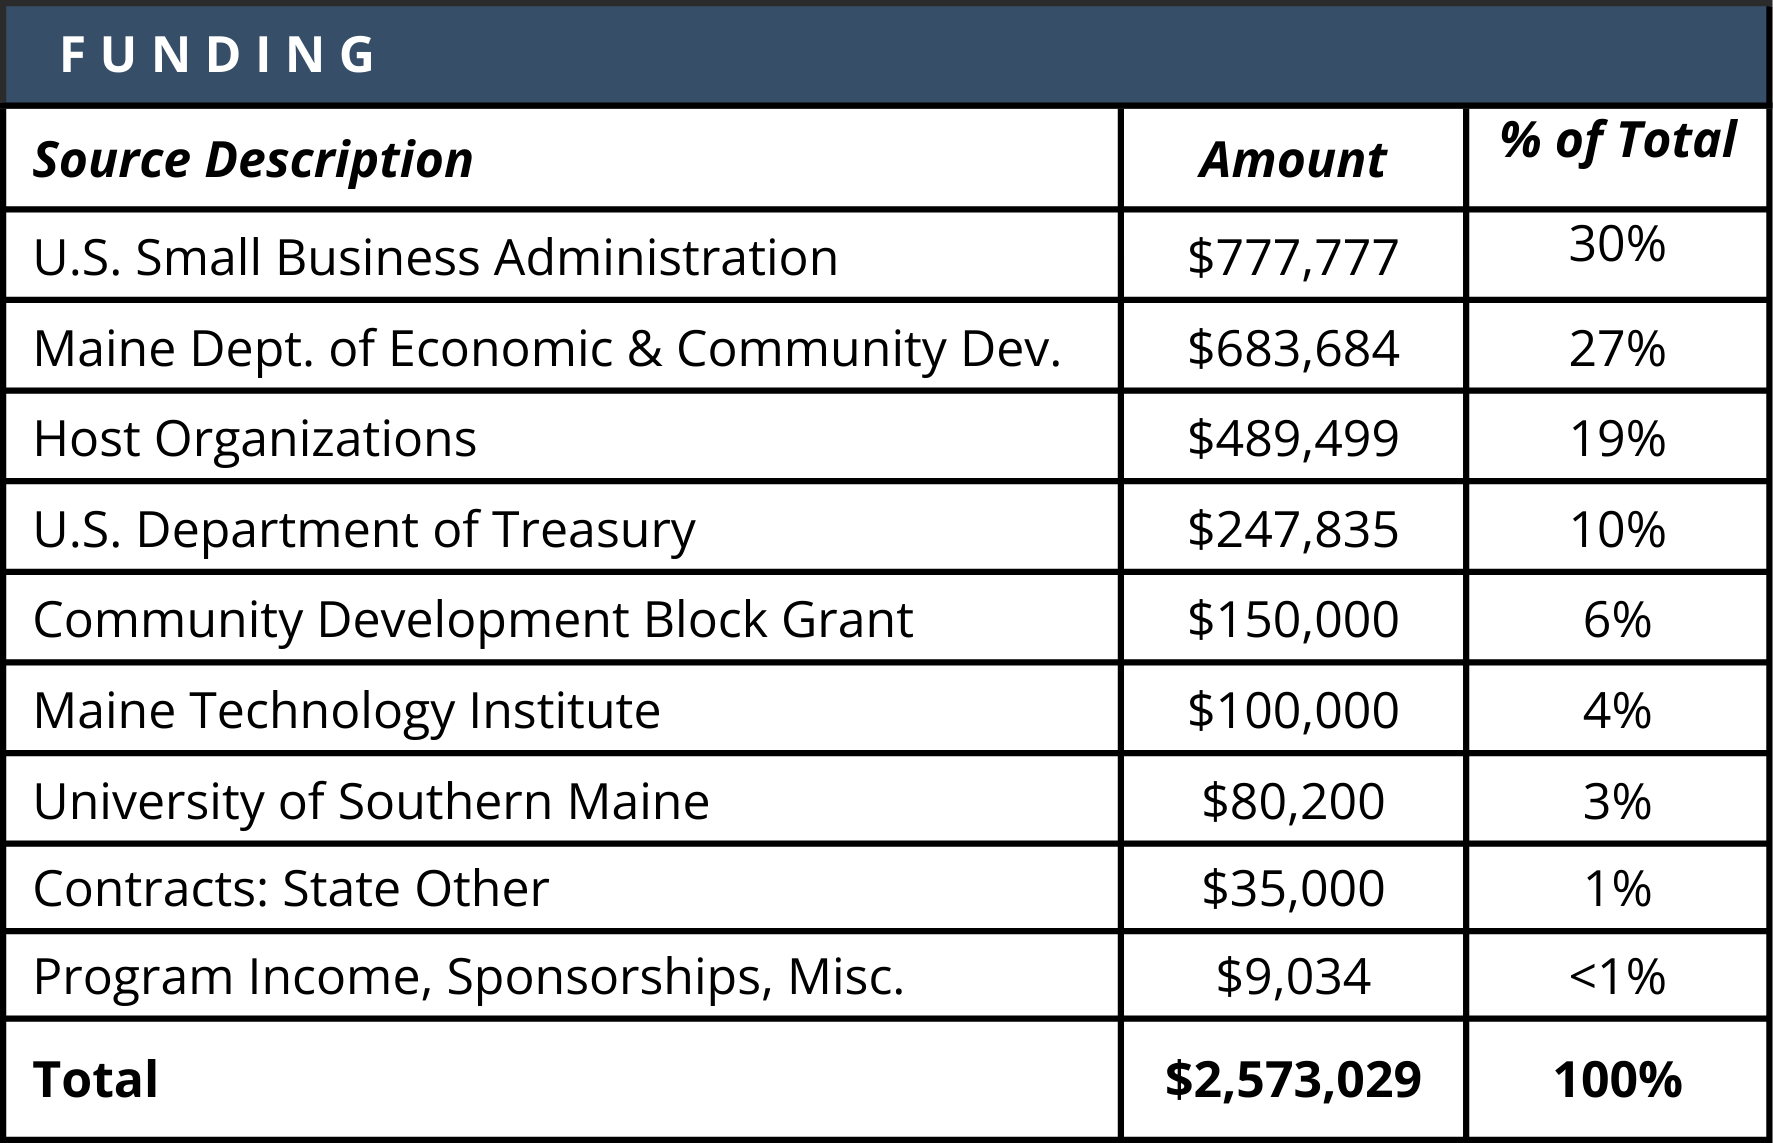 Source Description of FUNDING breaks down as follows, U.S. Small Business Administration - $777,777 or 30% Maine Dept. of Economic and Community Dev. - $683,684 or 27% Host Organizations - $489,499 or 19% U.S. Deptartment of Treasury - $247.835 or10% University of Southern Maine - $80,200 or 3% Community Development Block Grant - $150,000 or 6% Maine Technology Institute - $100,000 or 4% Contracts: State Other - $35,000 or 1% Program Income, Sponsorships, Misc. - $9,034 or less than 1%